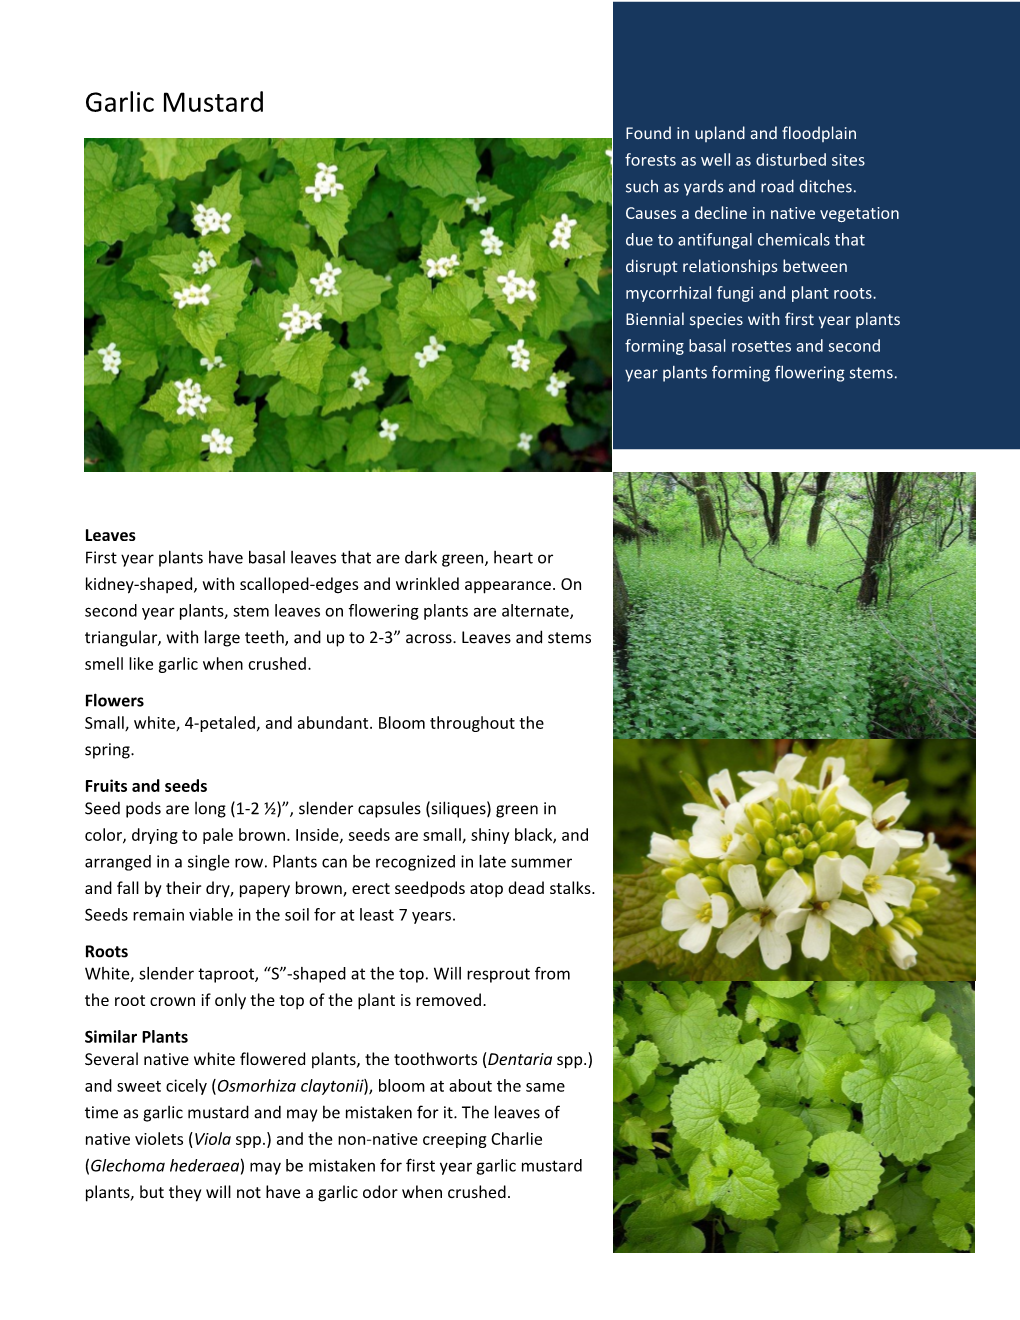 Garlic Mustard Found in Upland and Floodplain Forests As Well As Disturbed Sites